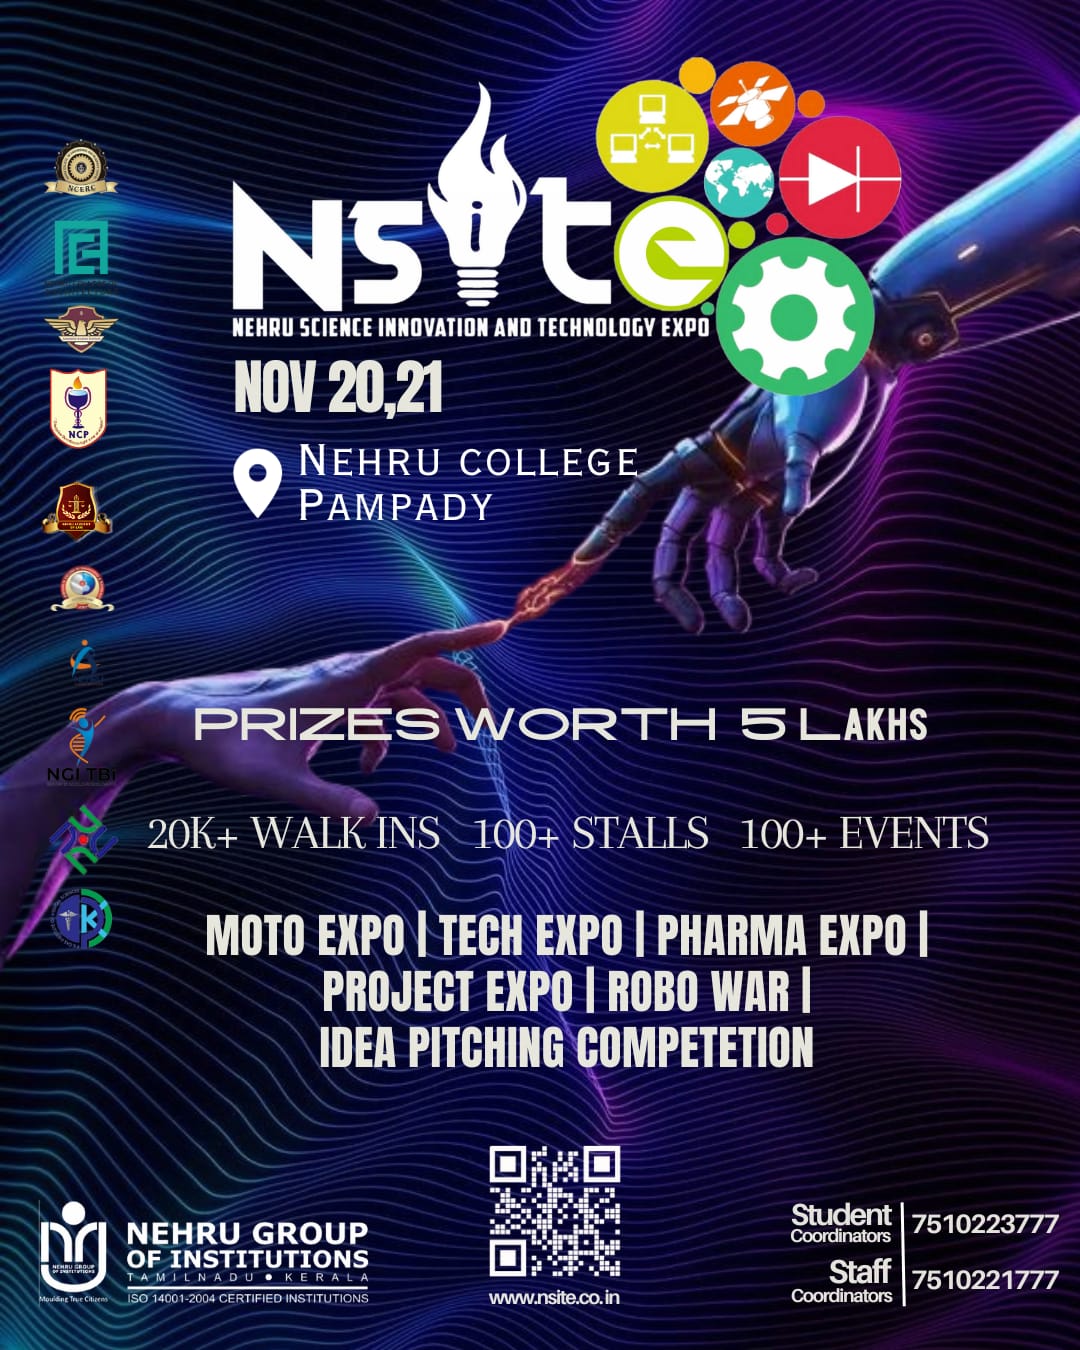 Nehru Science Innovation and Technology Expo (NSITE 2K23)